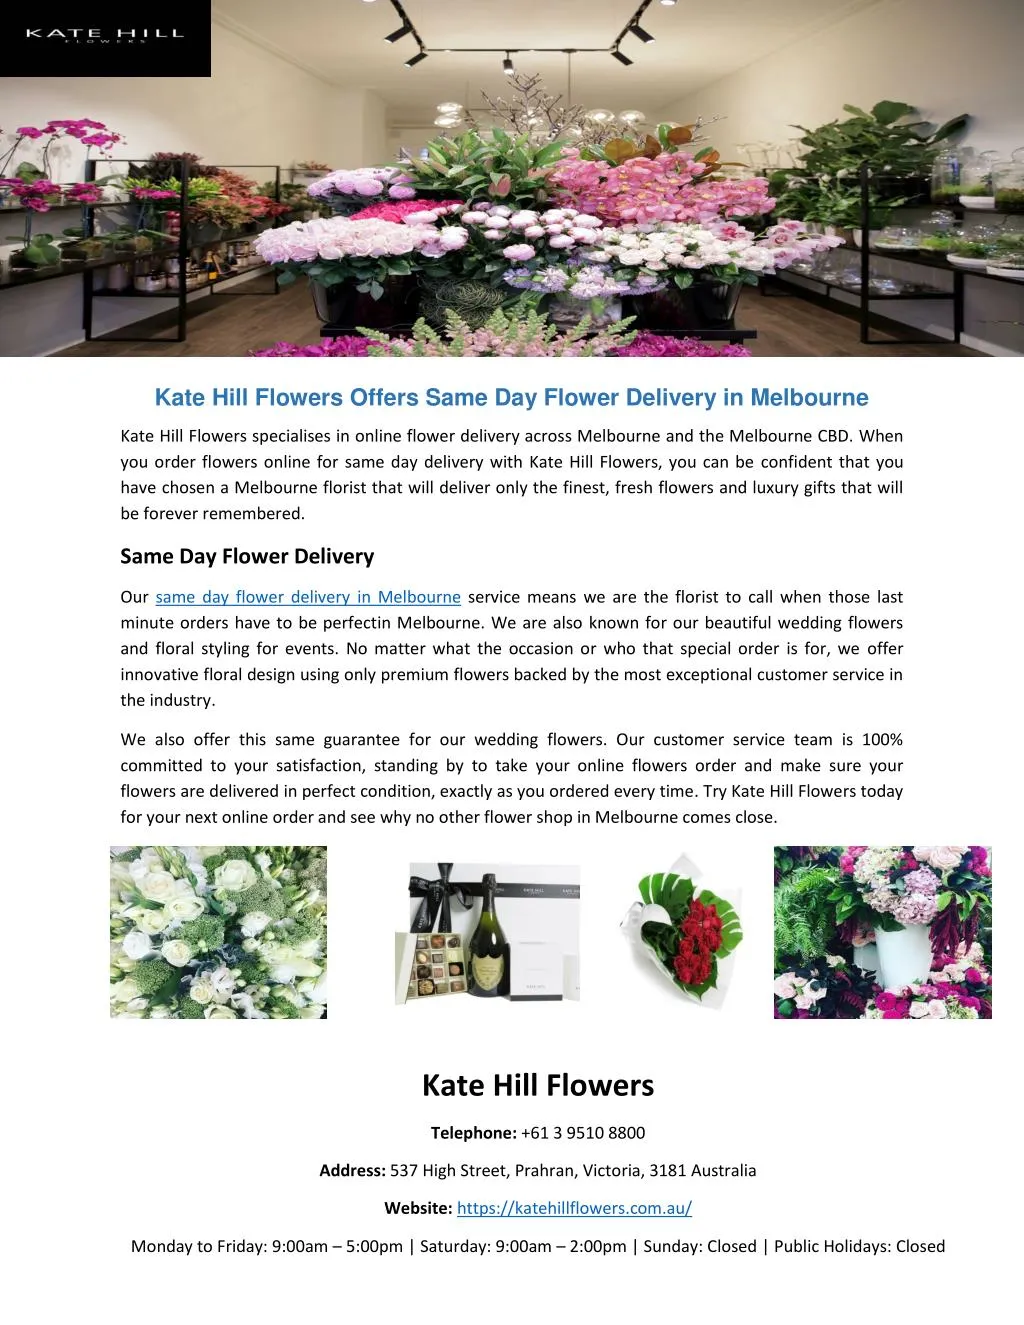 kate hill flowers offers same day flower delivery